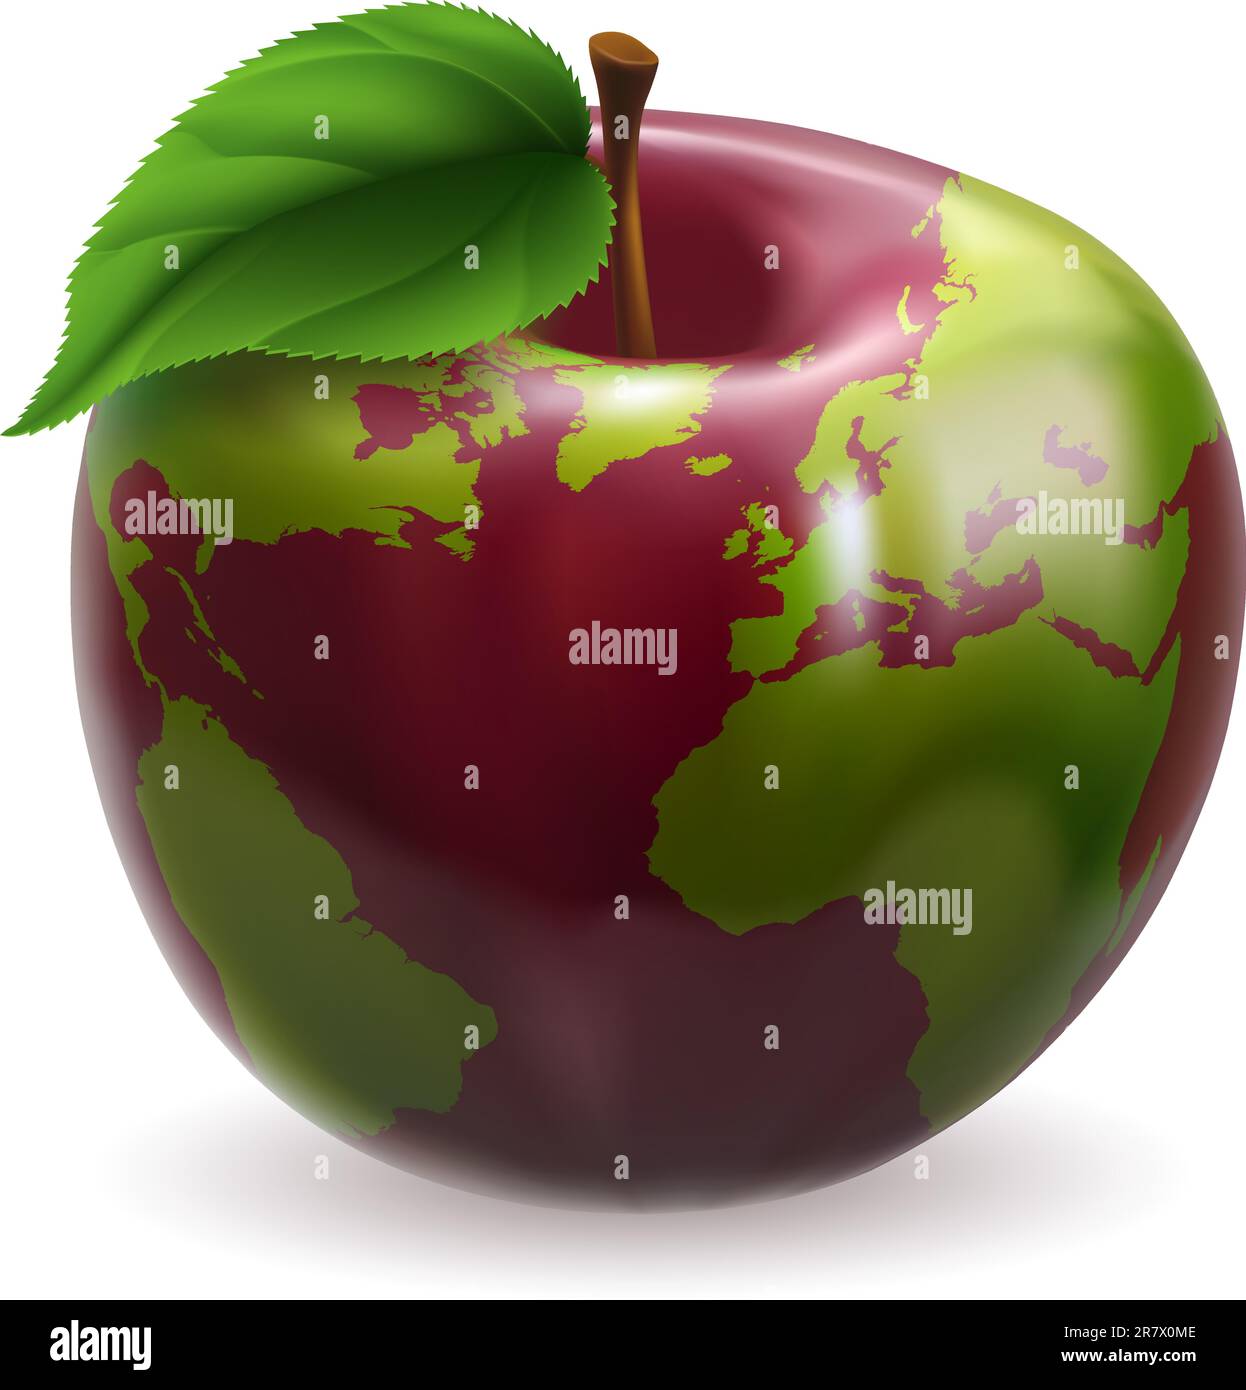 Red and green apple with world globe pattern on skin Stock Vector